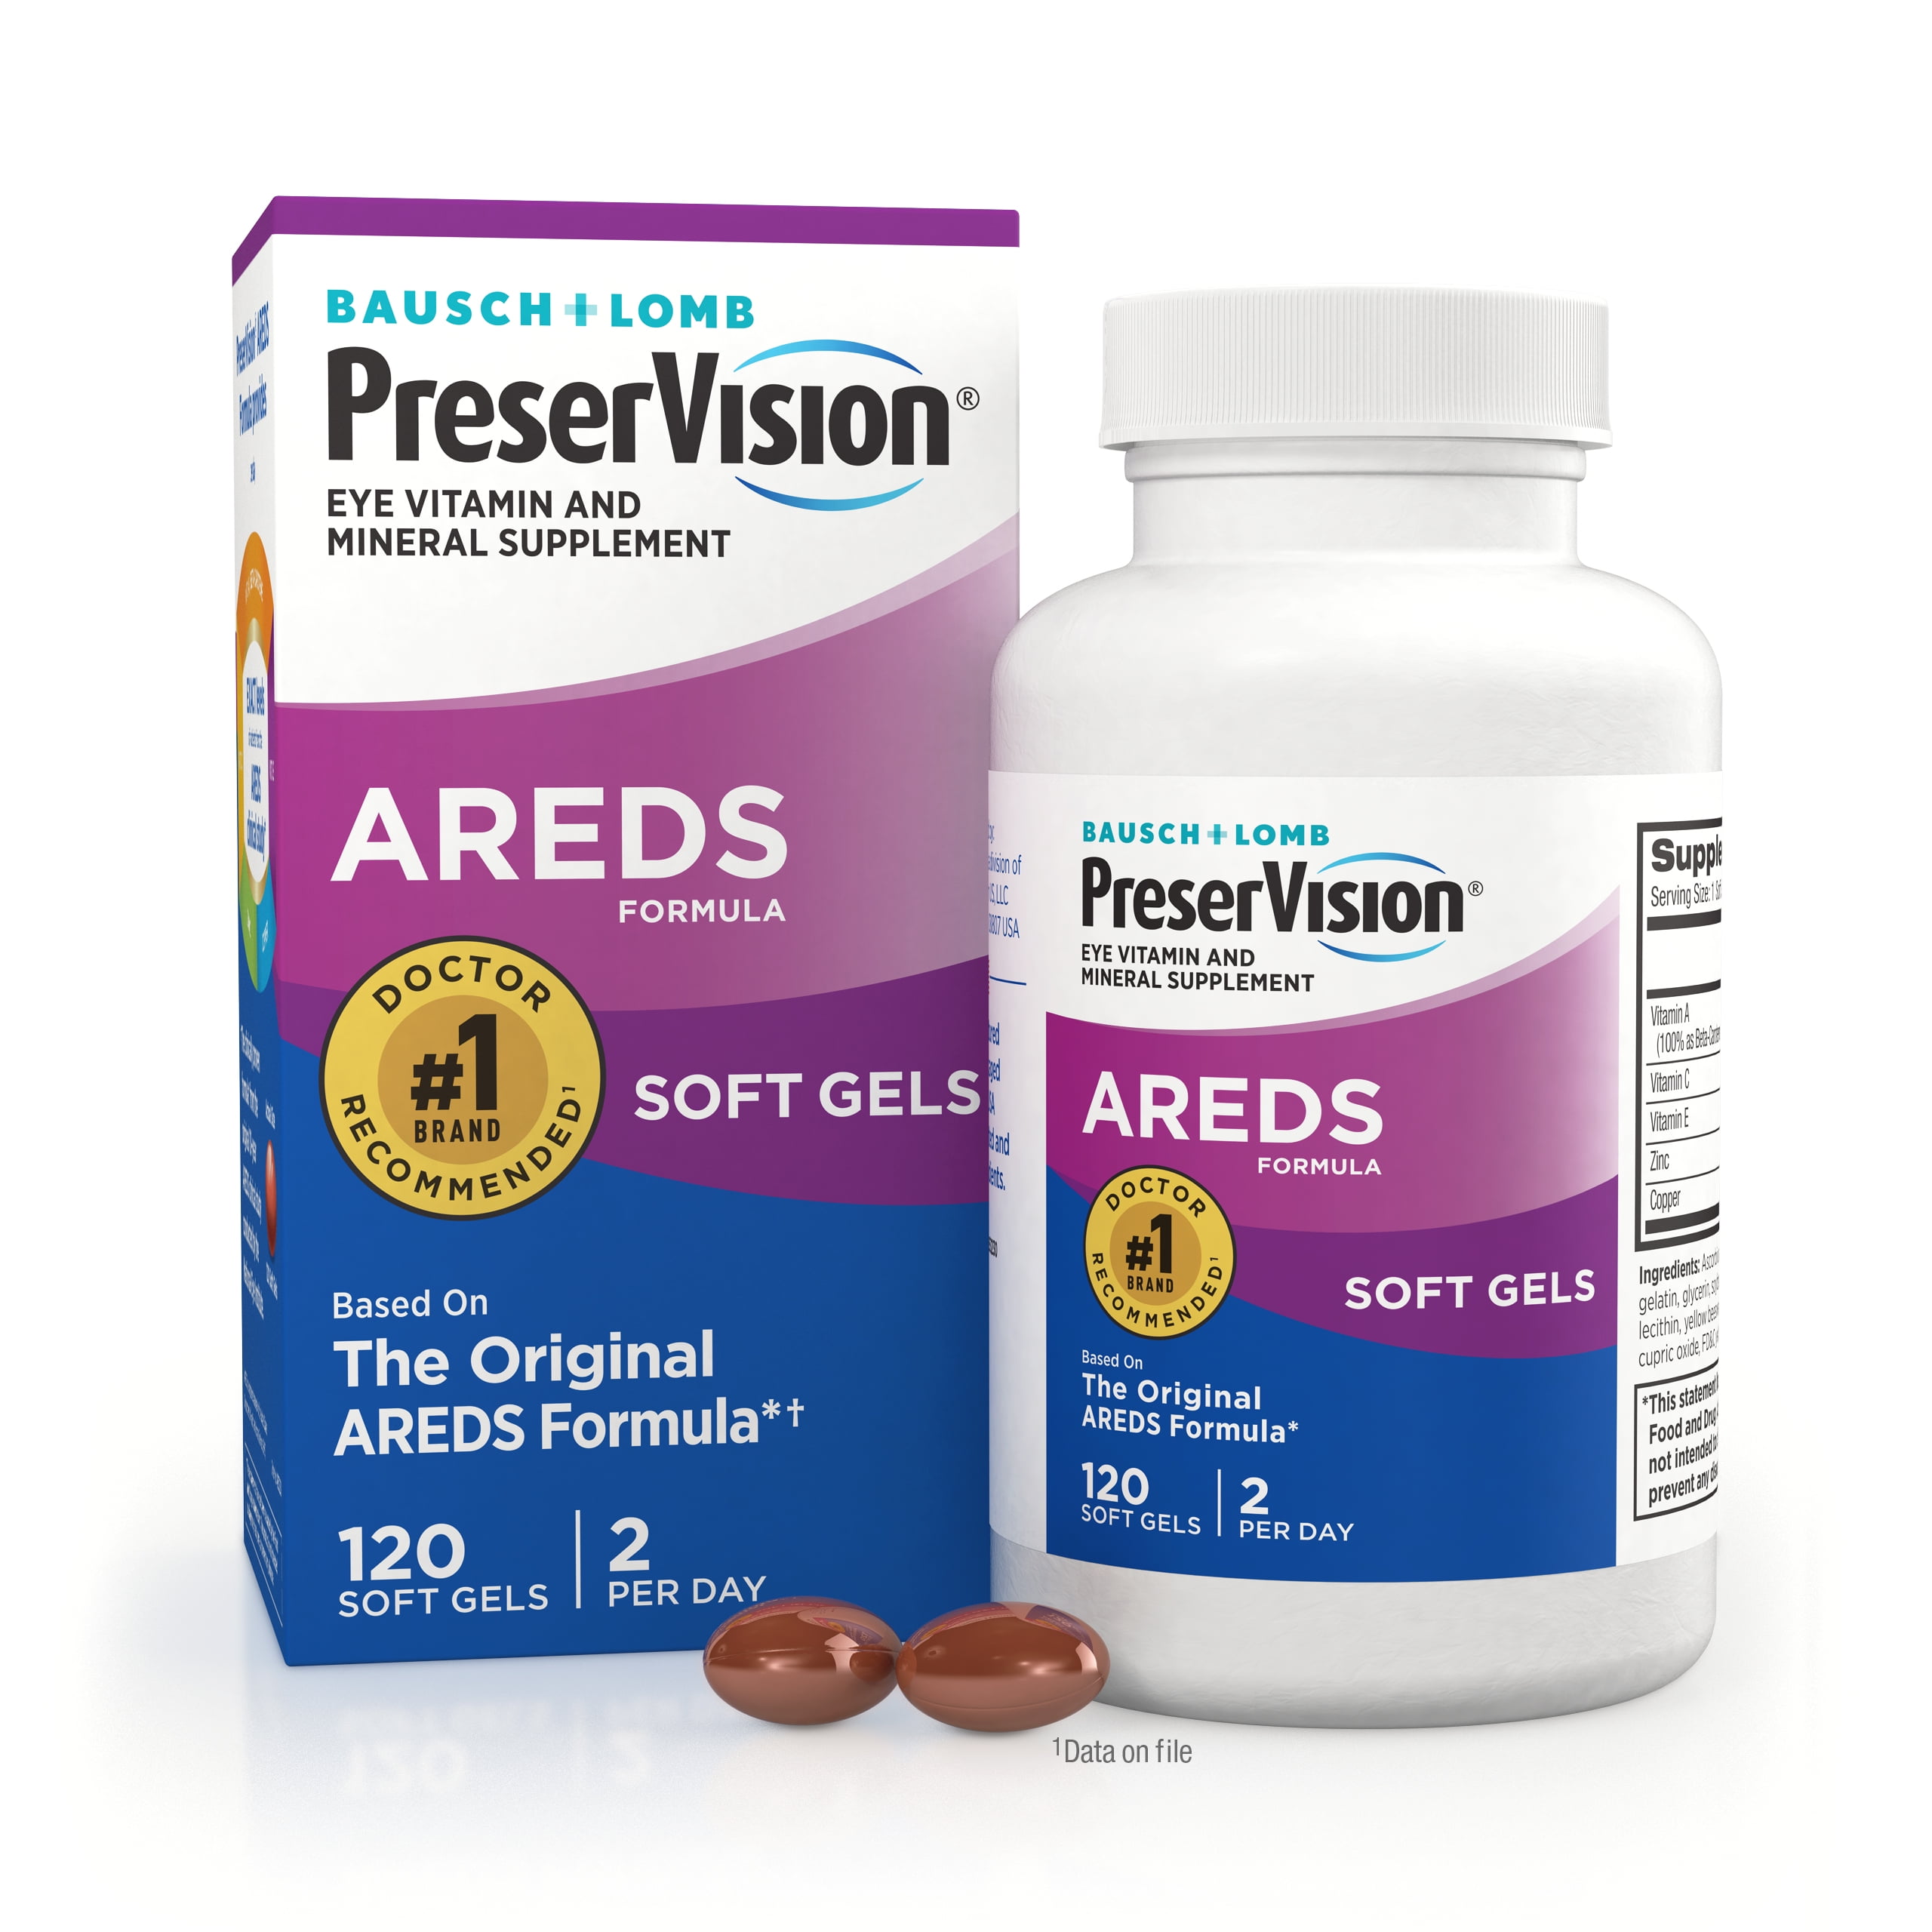 Bausch + Lomb PreserVision AREDS Eye Vitamin & Mineral Supplement Tablets, 120 Count Bottle (Soft Gels)